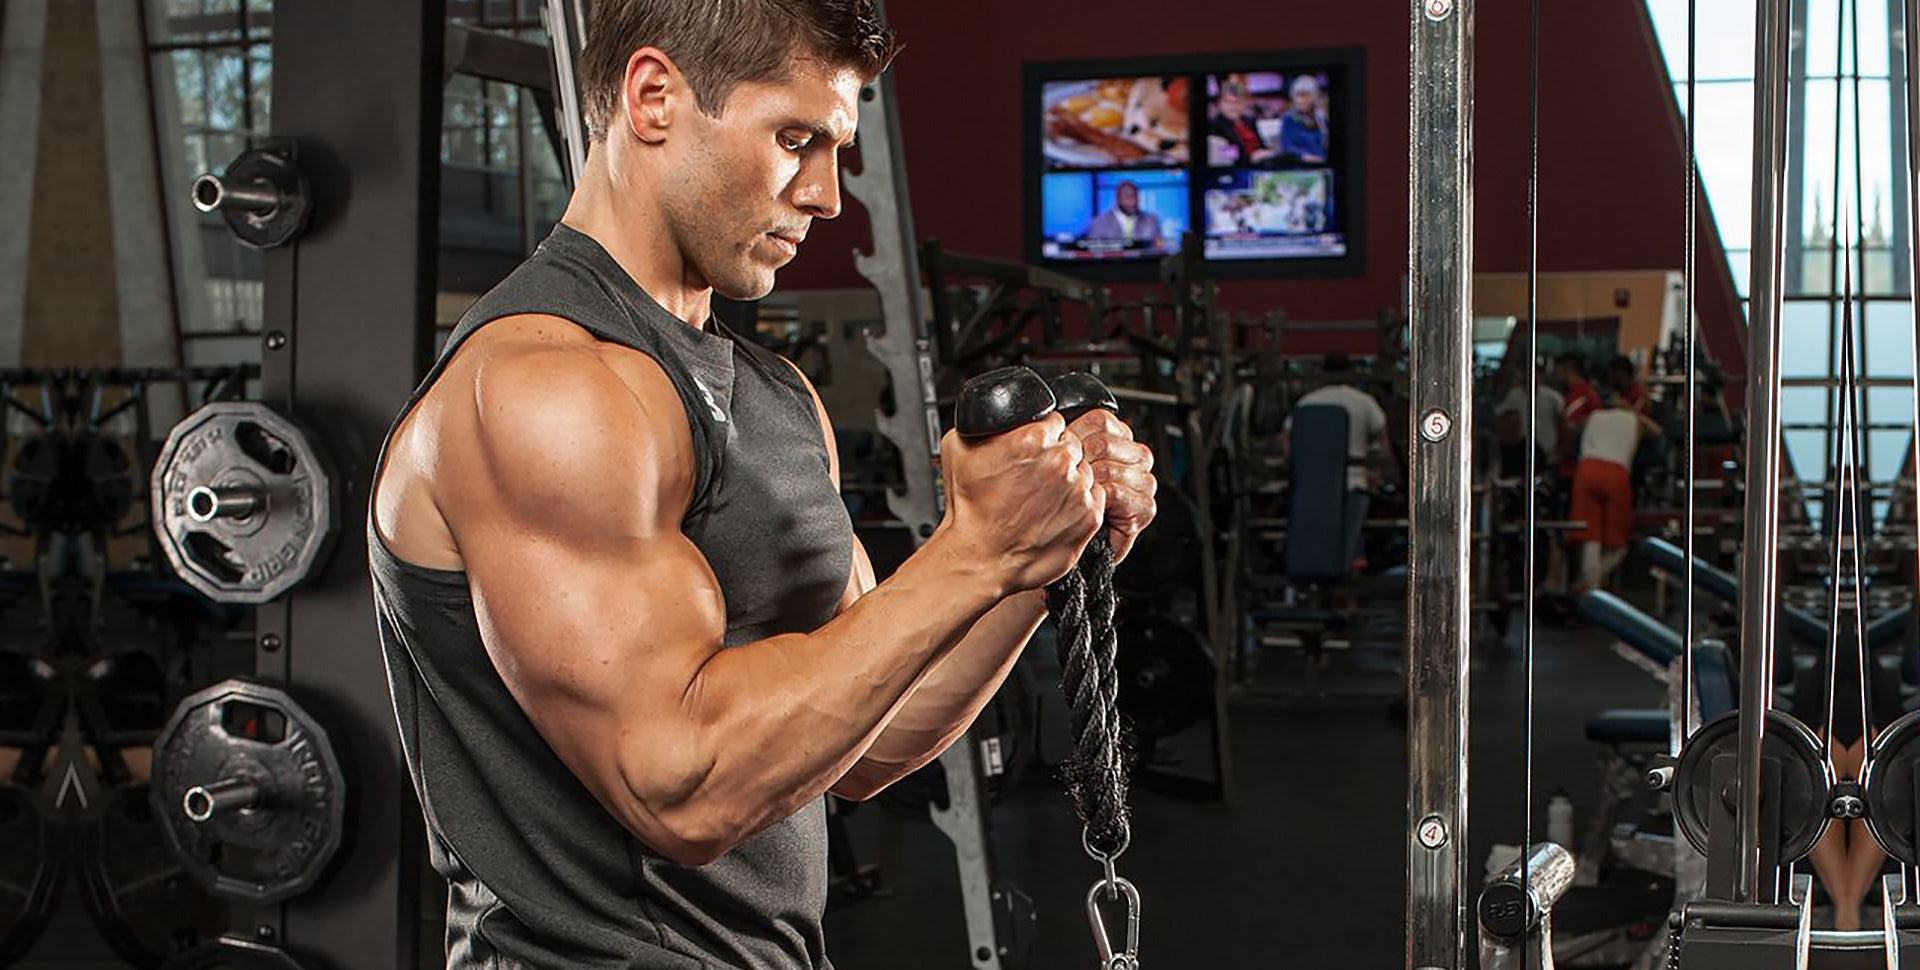 Part 1: The 3 exercises you need for bigger biceps - The Fitness